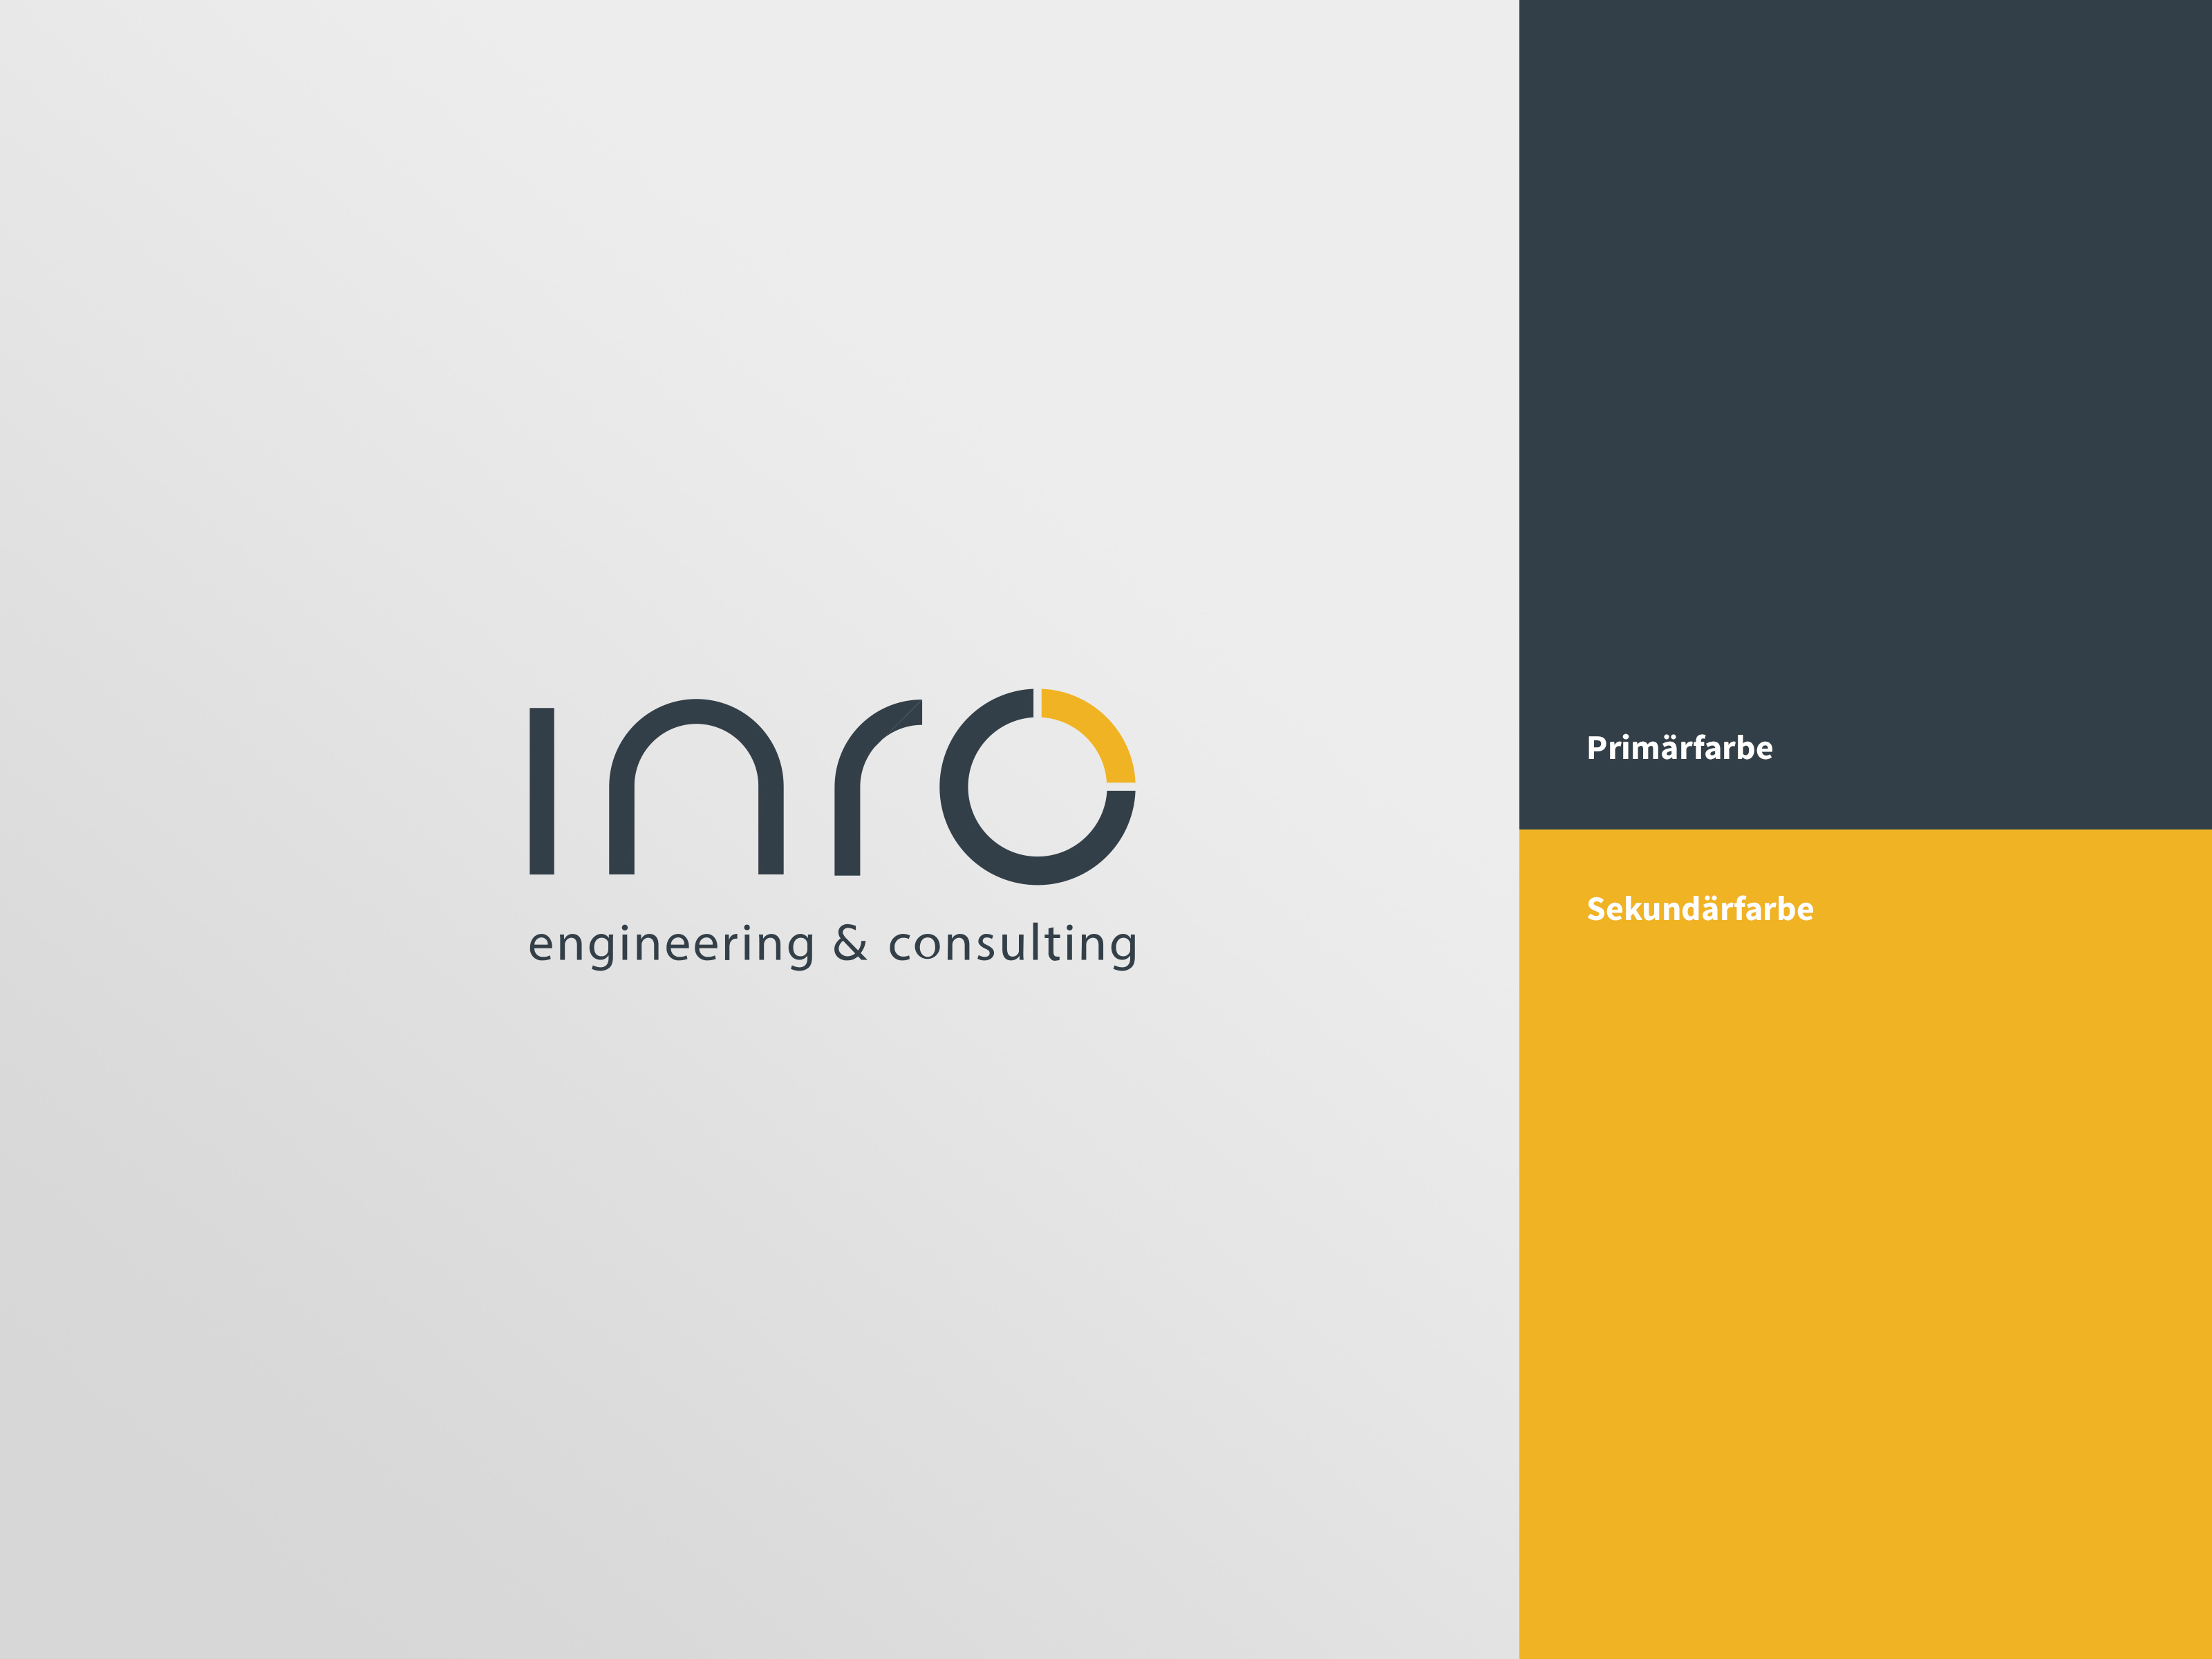 neuland-dribbble-inro-engineering-and-consulting-gmbh-corporate-design-02.jpg